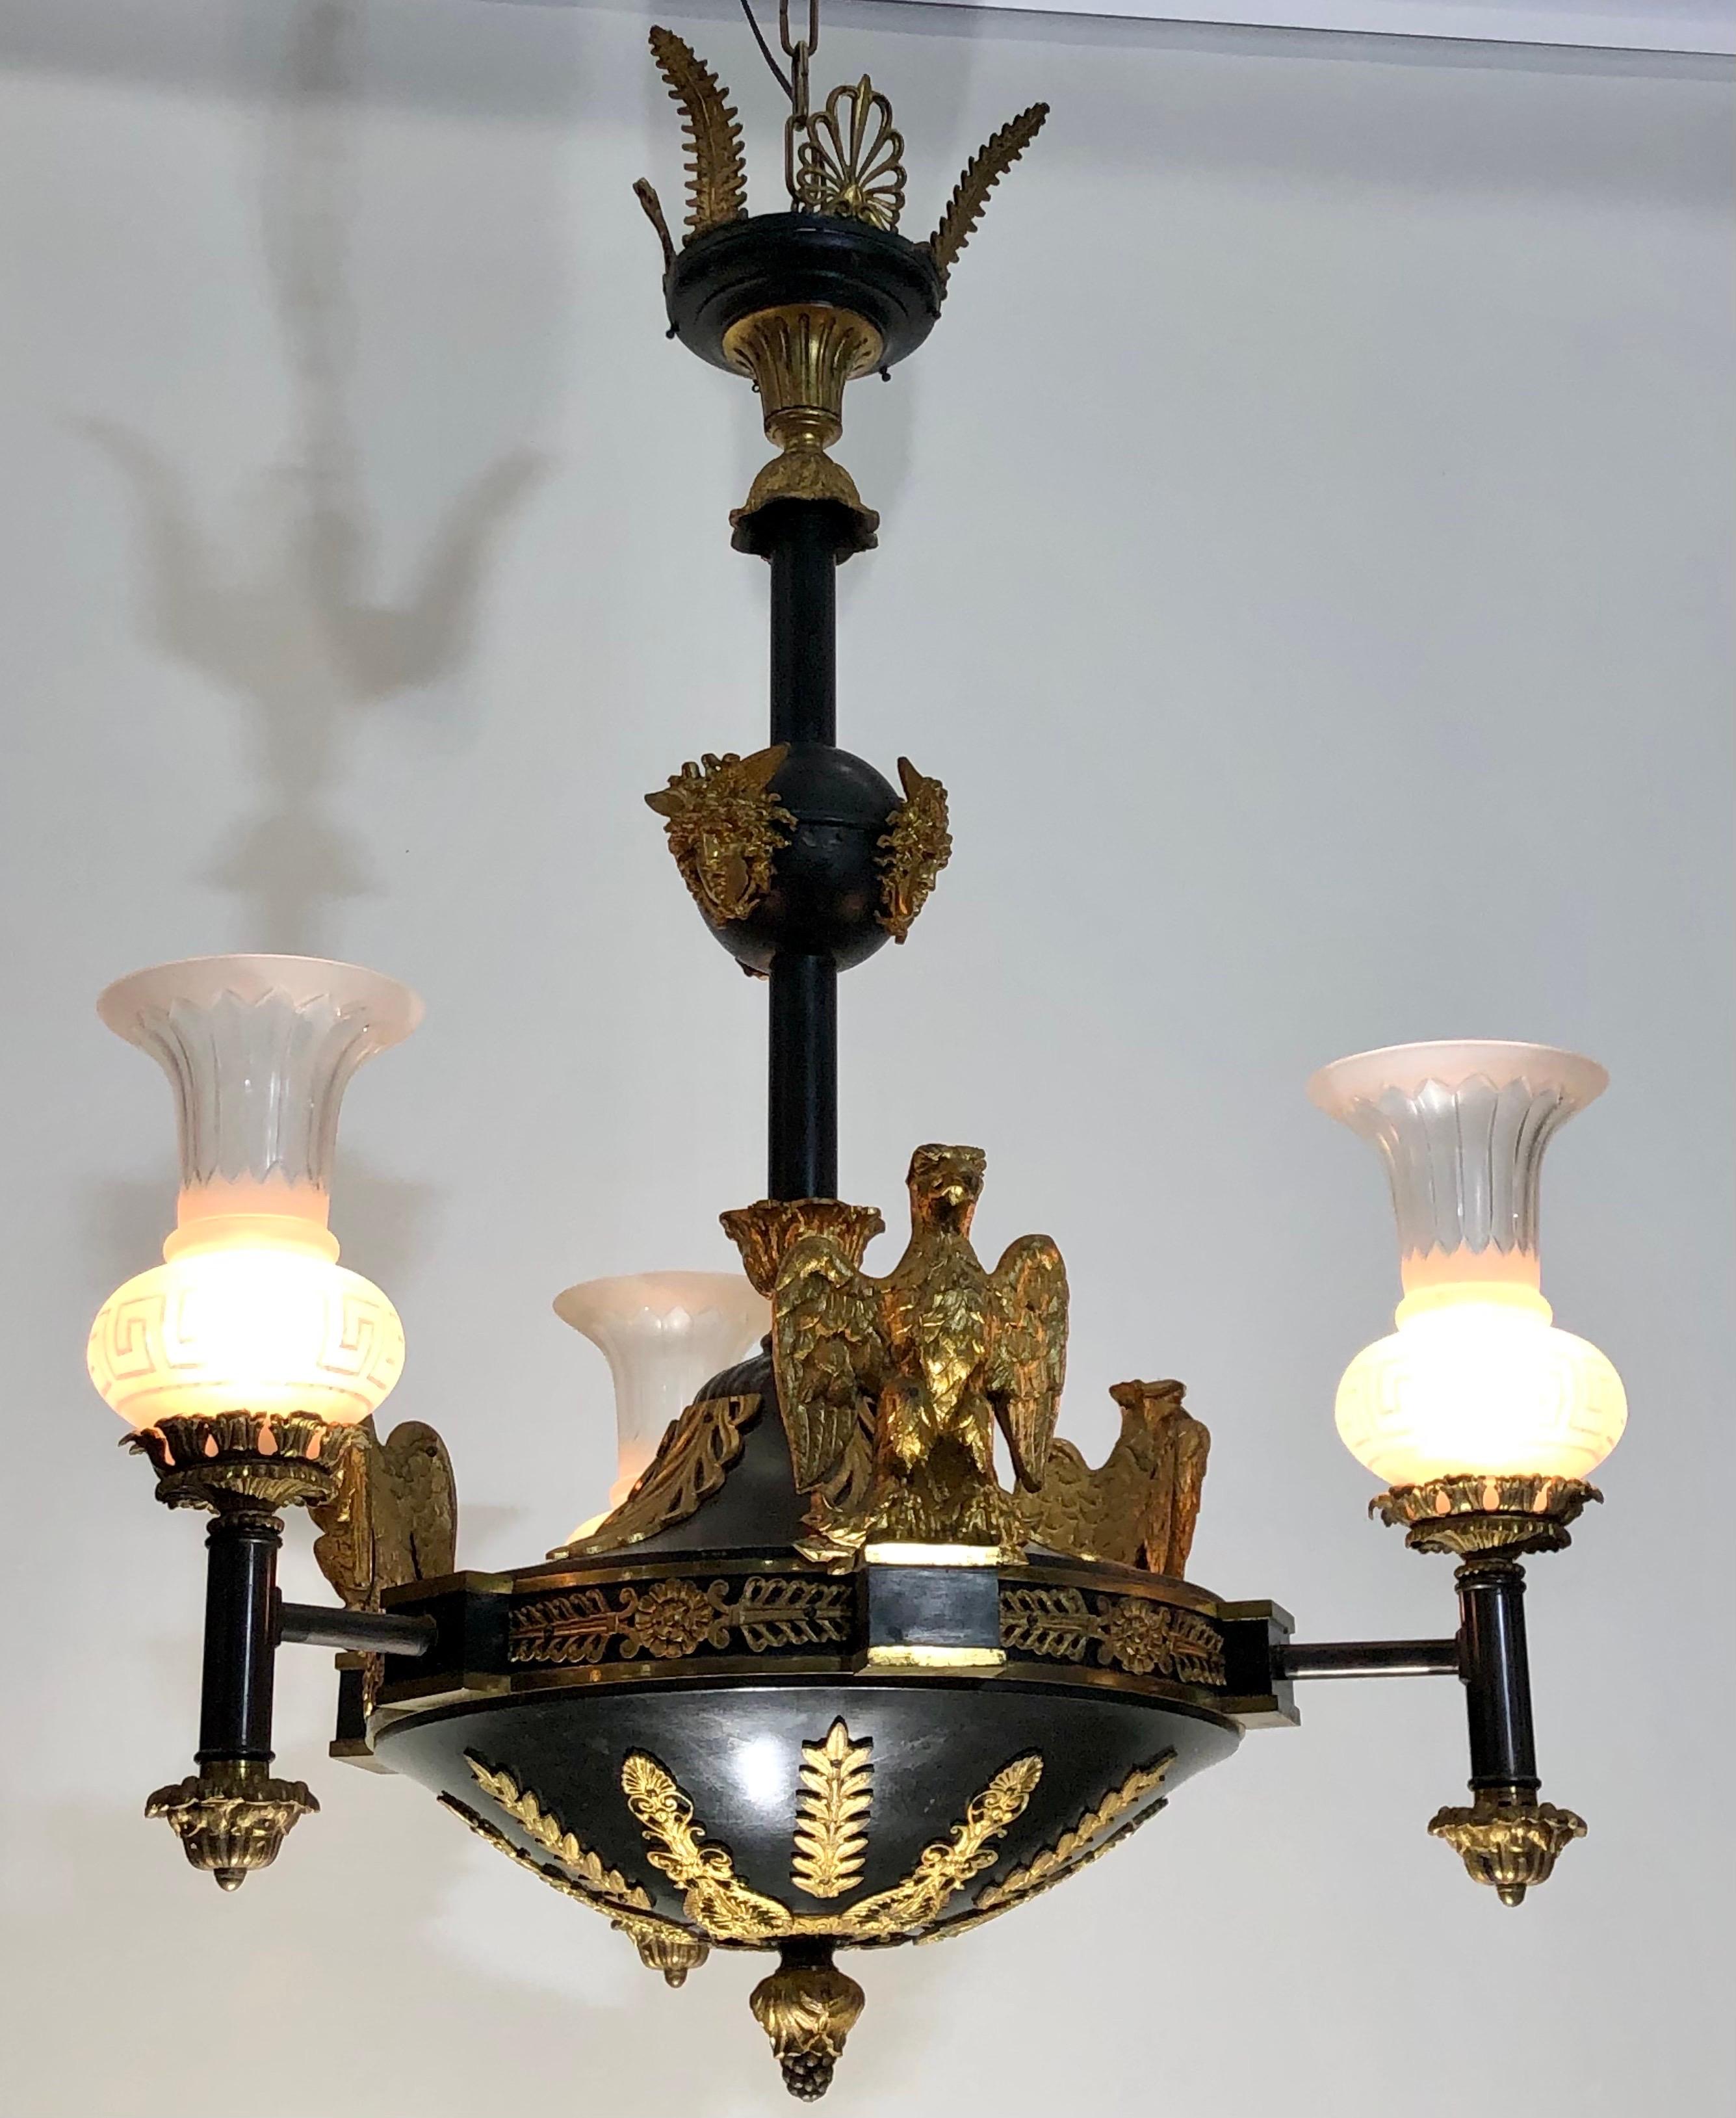  Medusa Rondanini and Eagle Mounted French Empire Bronze Gasolier / Chandelier For Sale 9